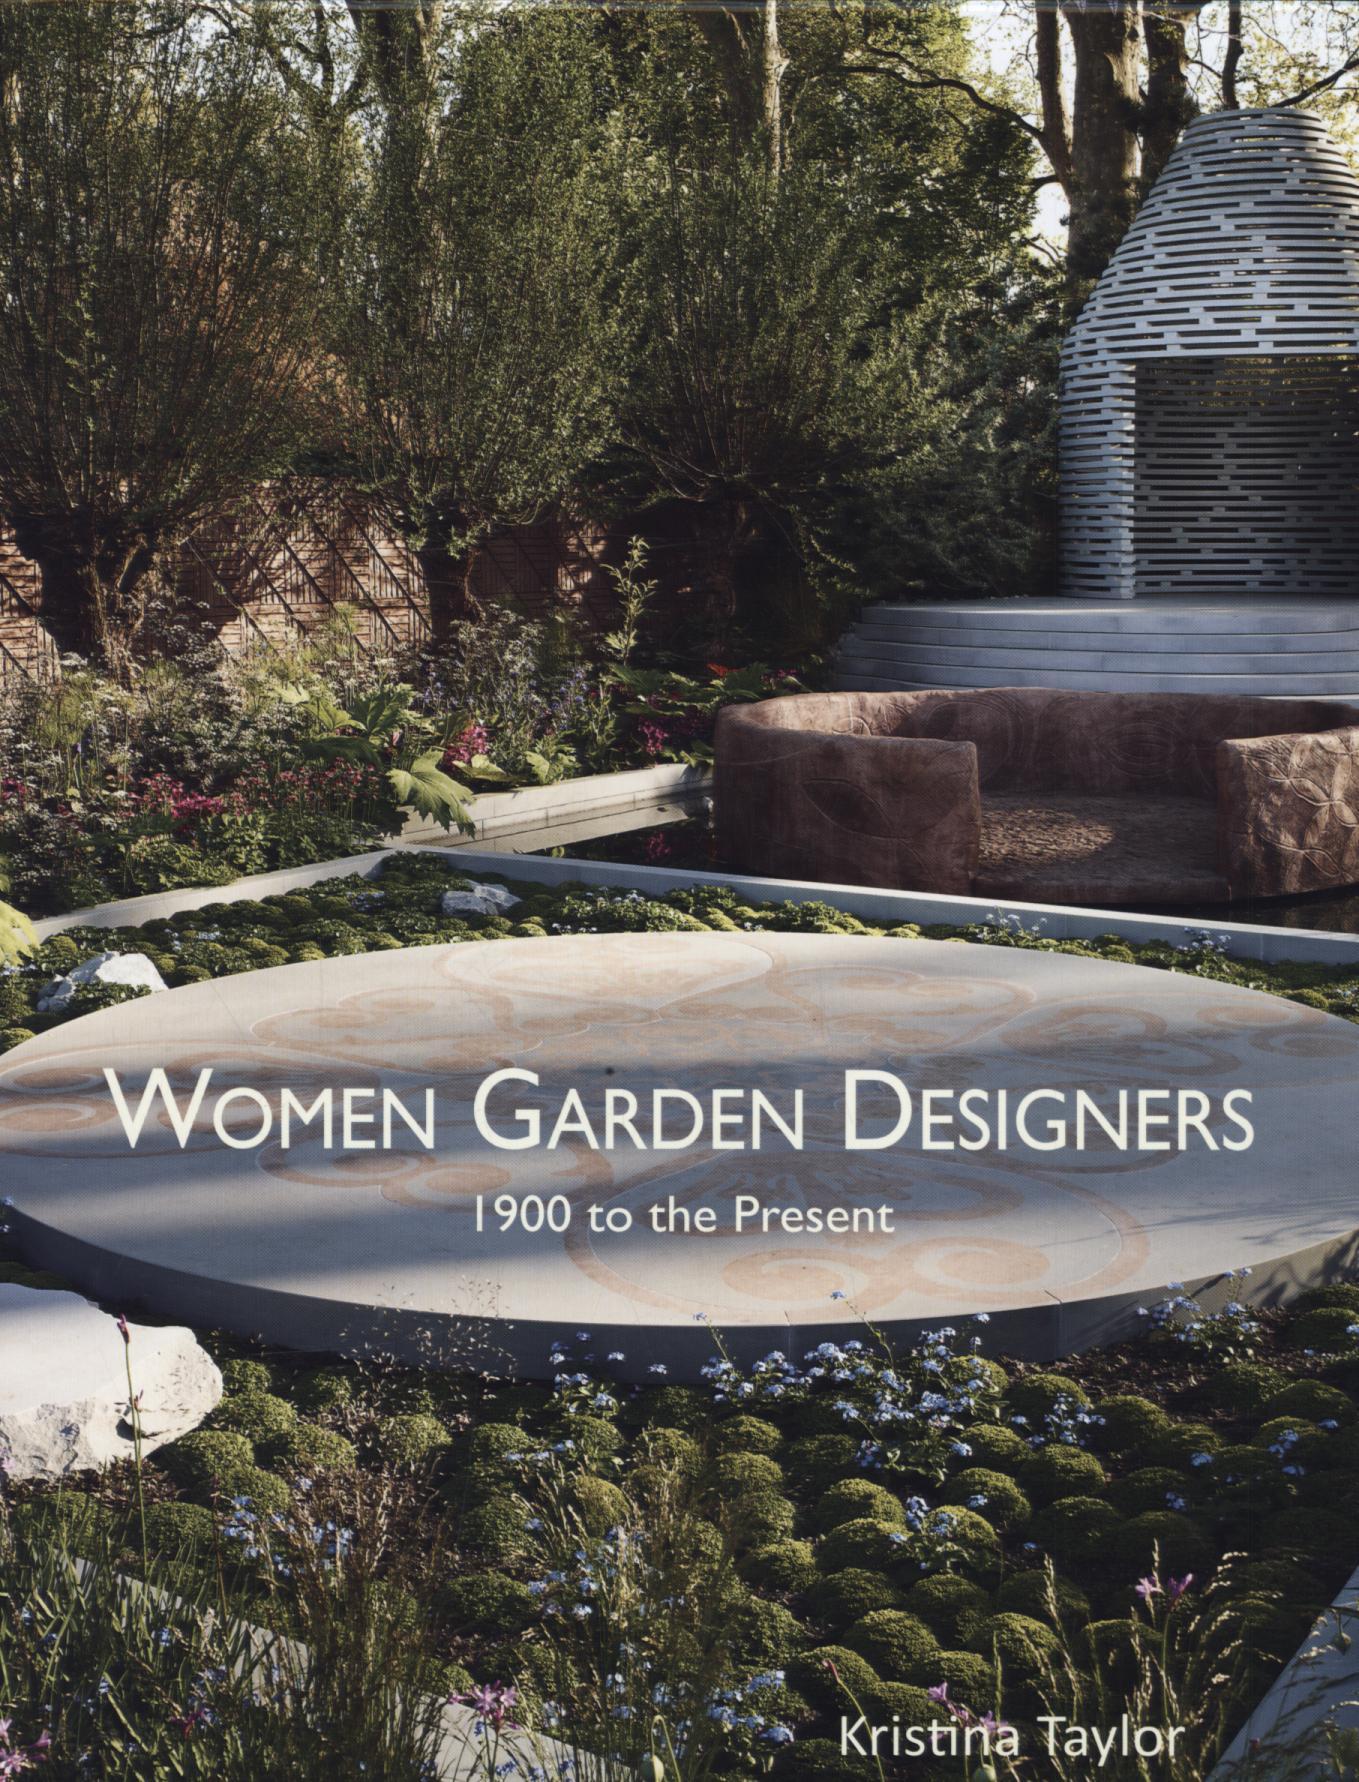 Women Garden Designers: From 1900 to the Present - Kristina Taylor